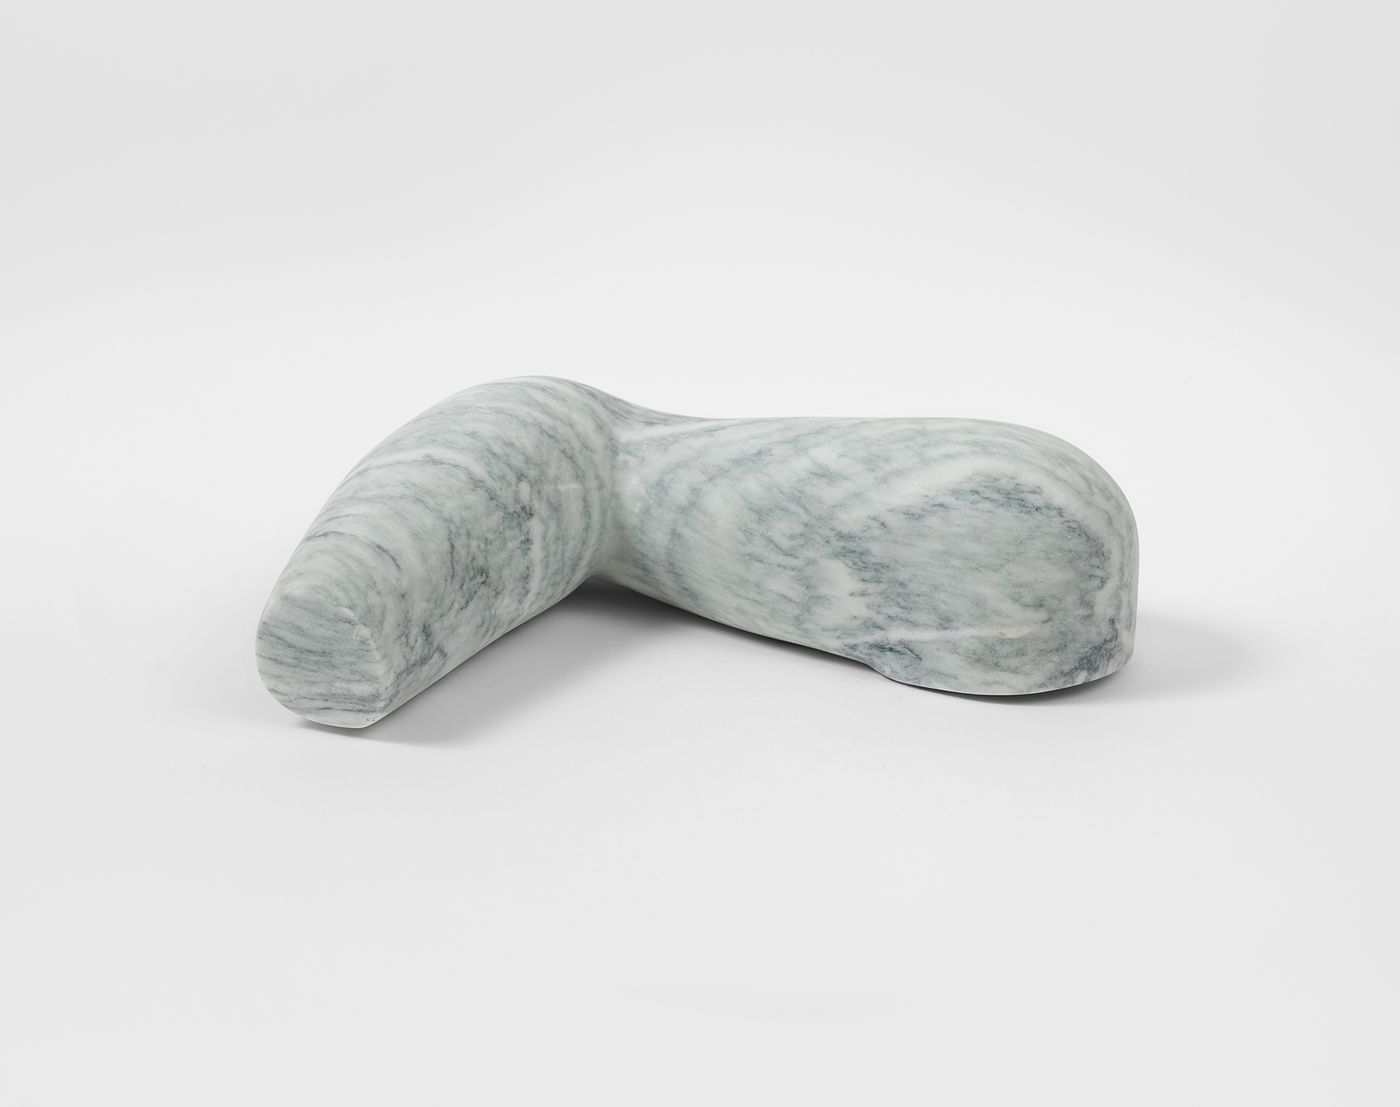 Chang Sujung, Arms only bent inward, 2022. Marble 11¾ x 10½ x 3¾ in (29.8 x 26.6 x 9.5 cm).